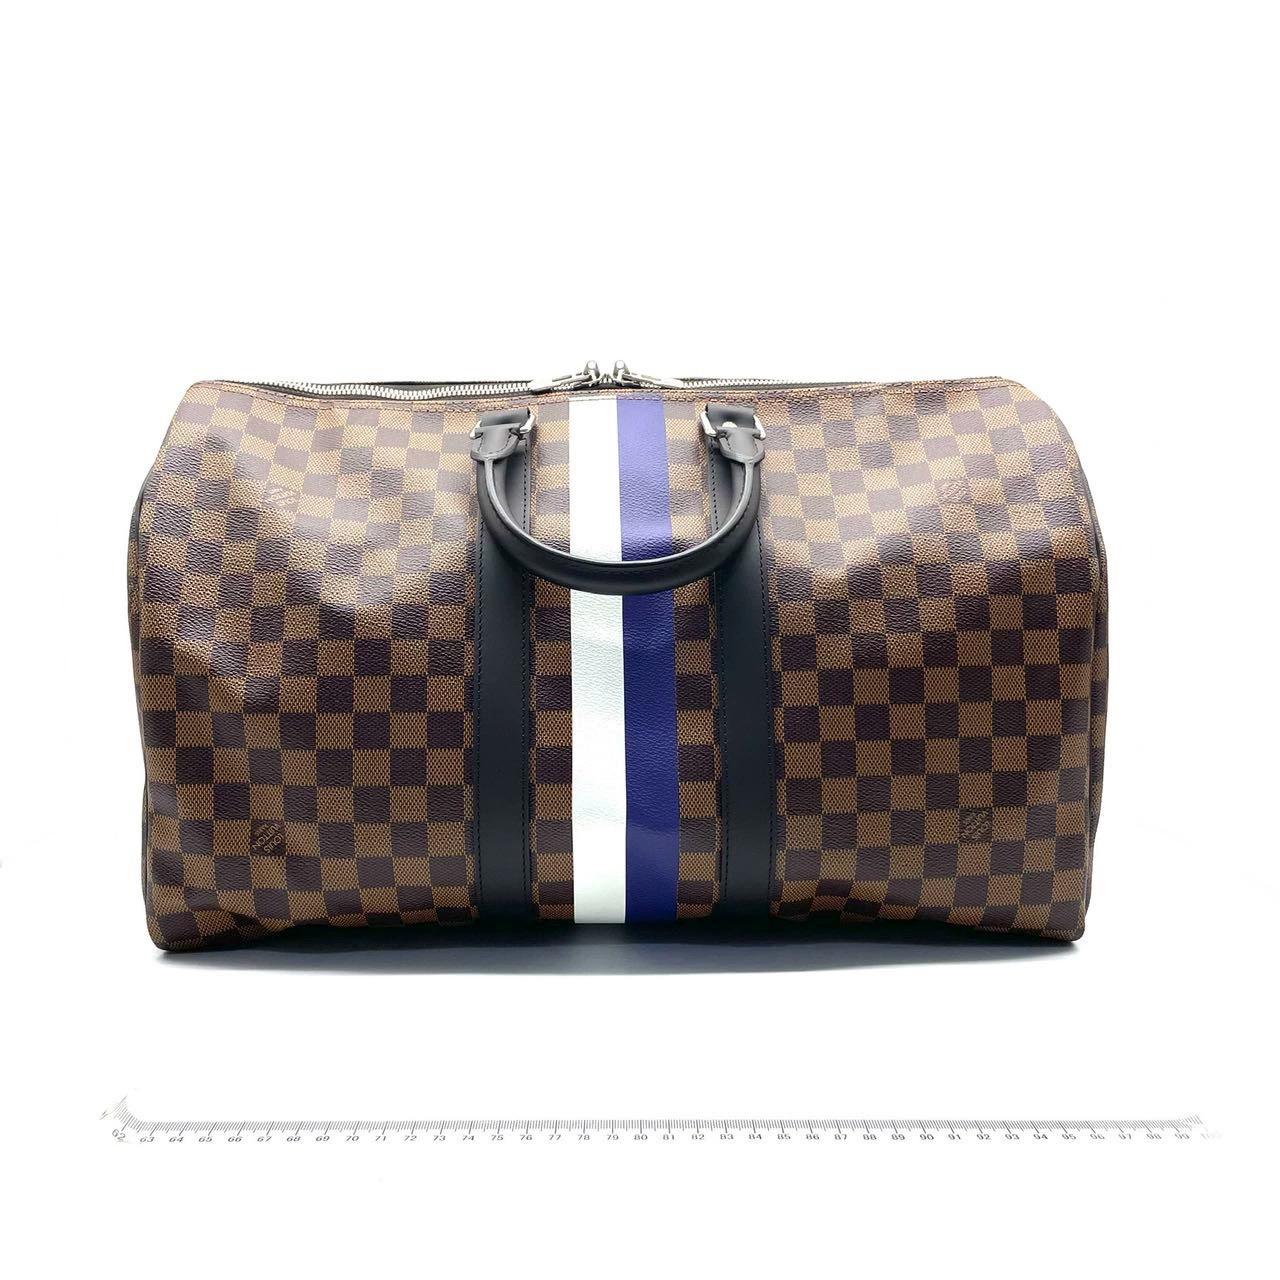 Included Accessories

STRAP,LUGGAGE TAG,LOOP,LOCK, Dustbag

Season

SPRING/SUMMER 17

You’ll be roaring in style with this limited edition Louis Vuitton keepall. Part of the the Savannah collection, this duffle features a giraffe motif against a